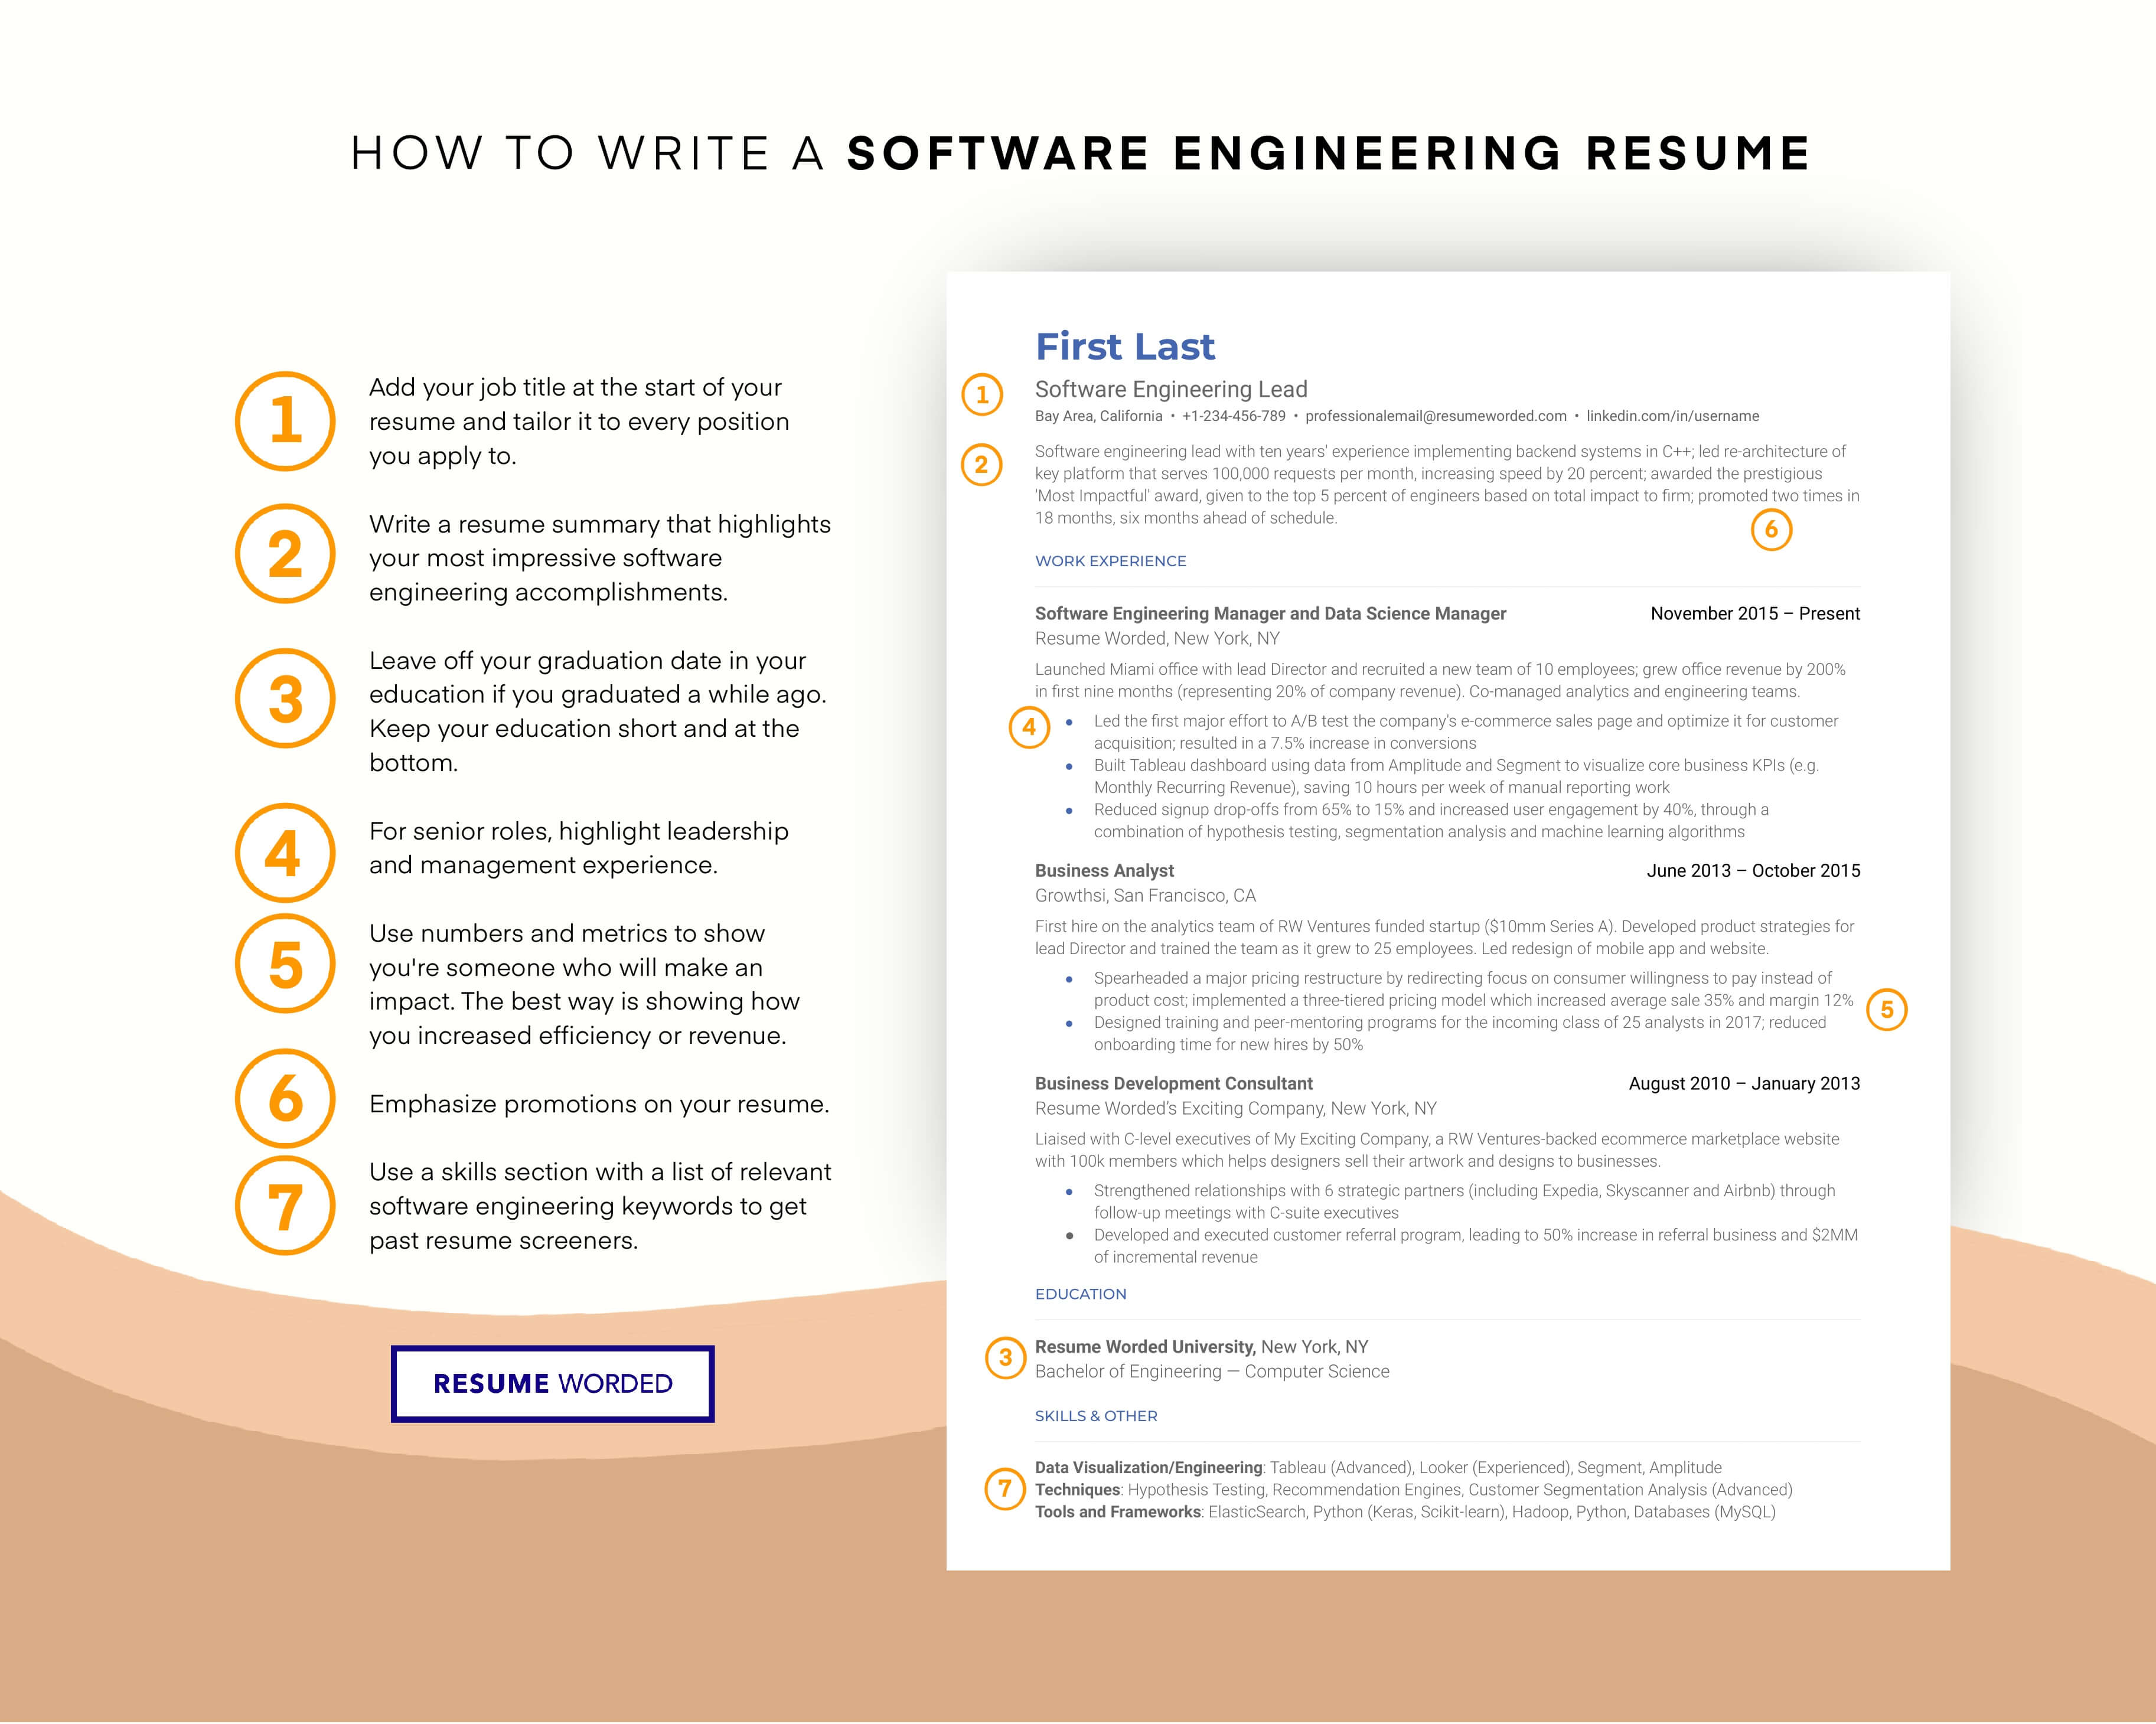 Demonstrates effective software engineering results with context - Front End Developer Resume